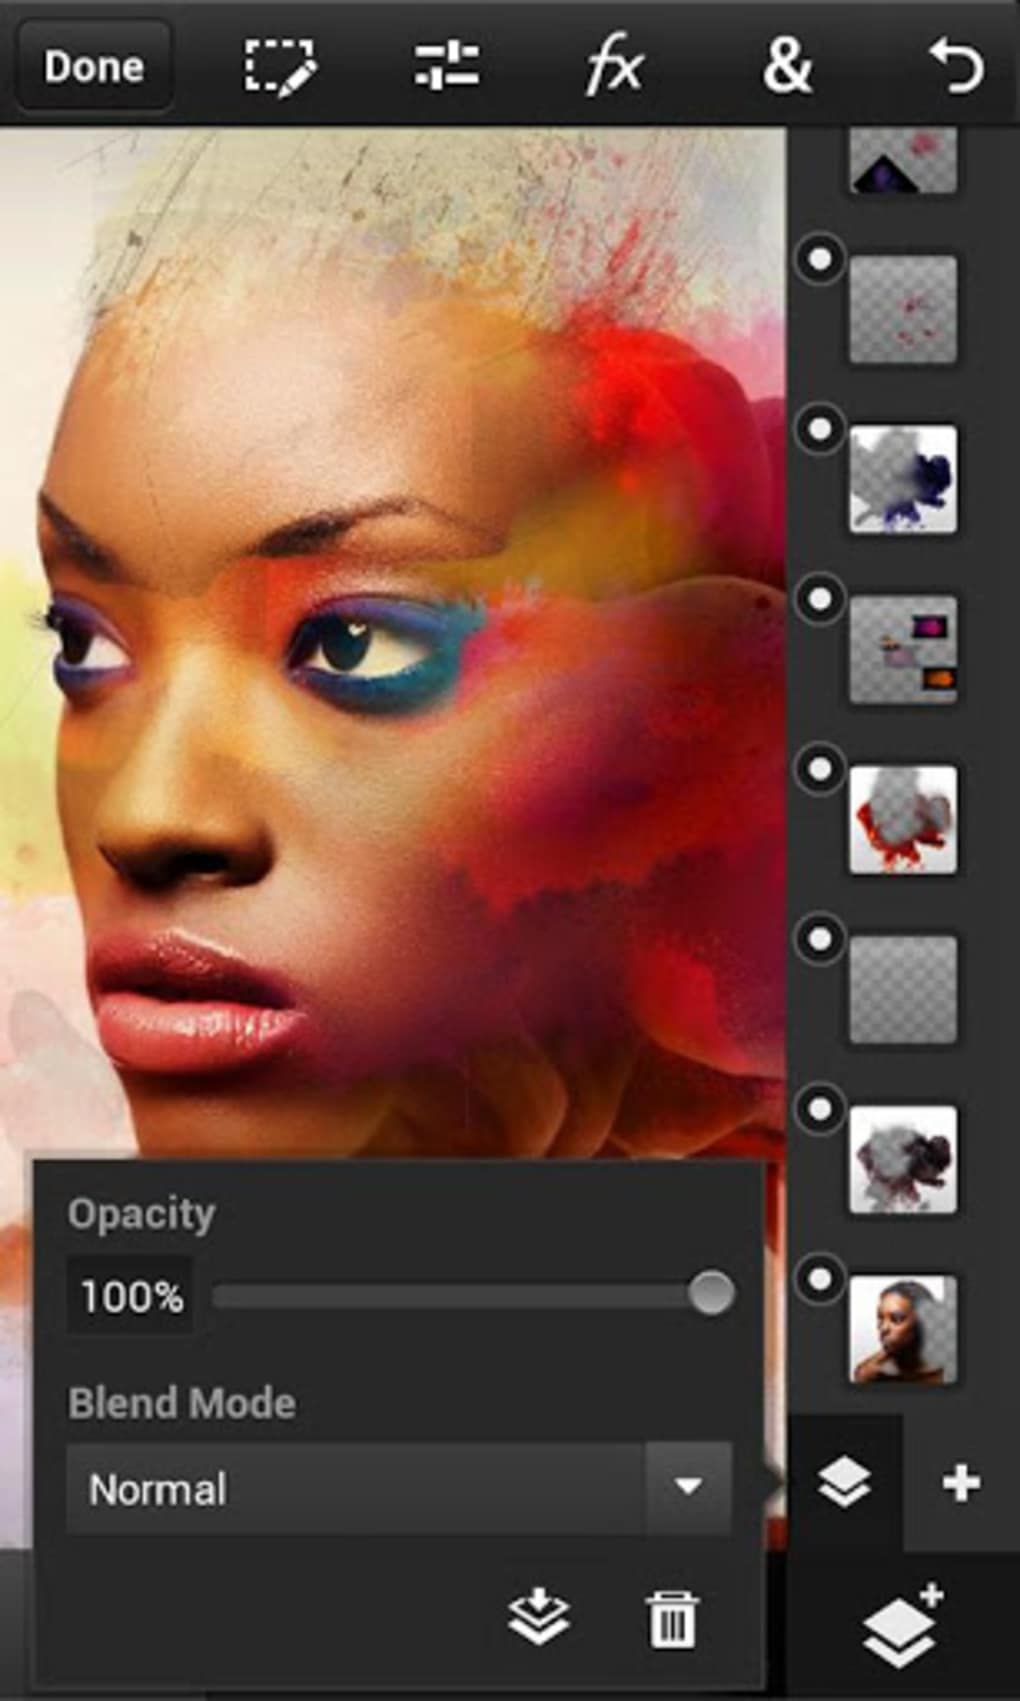 adobe photoshop touch app download for android